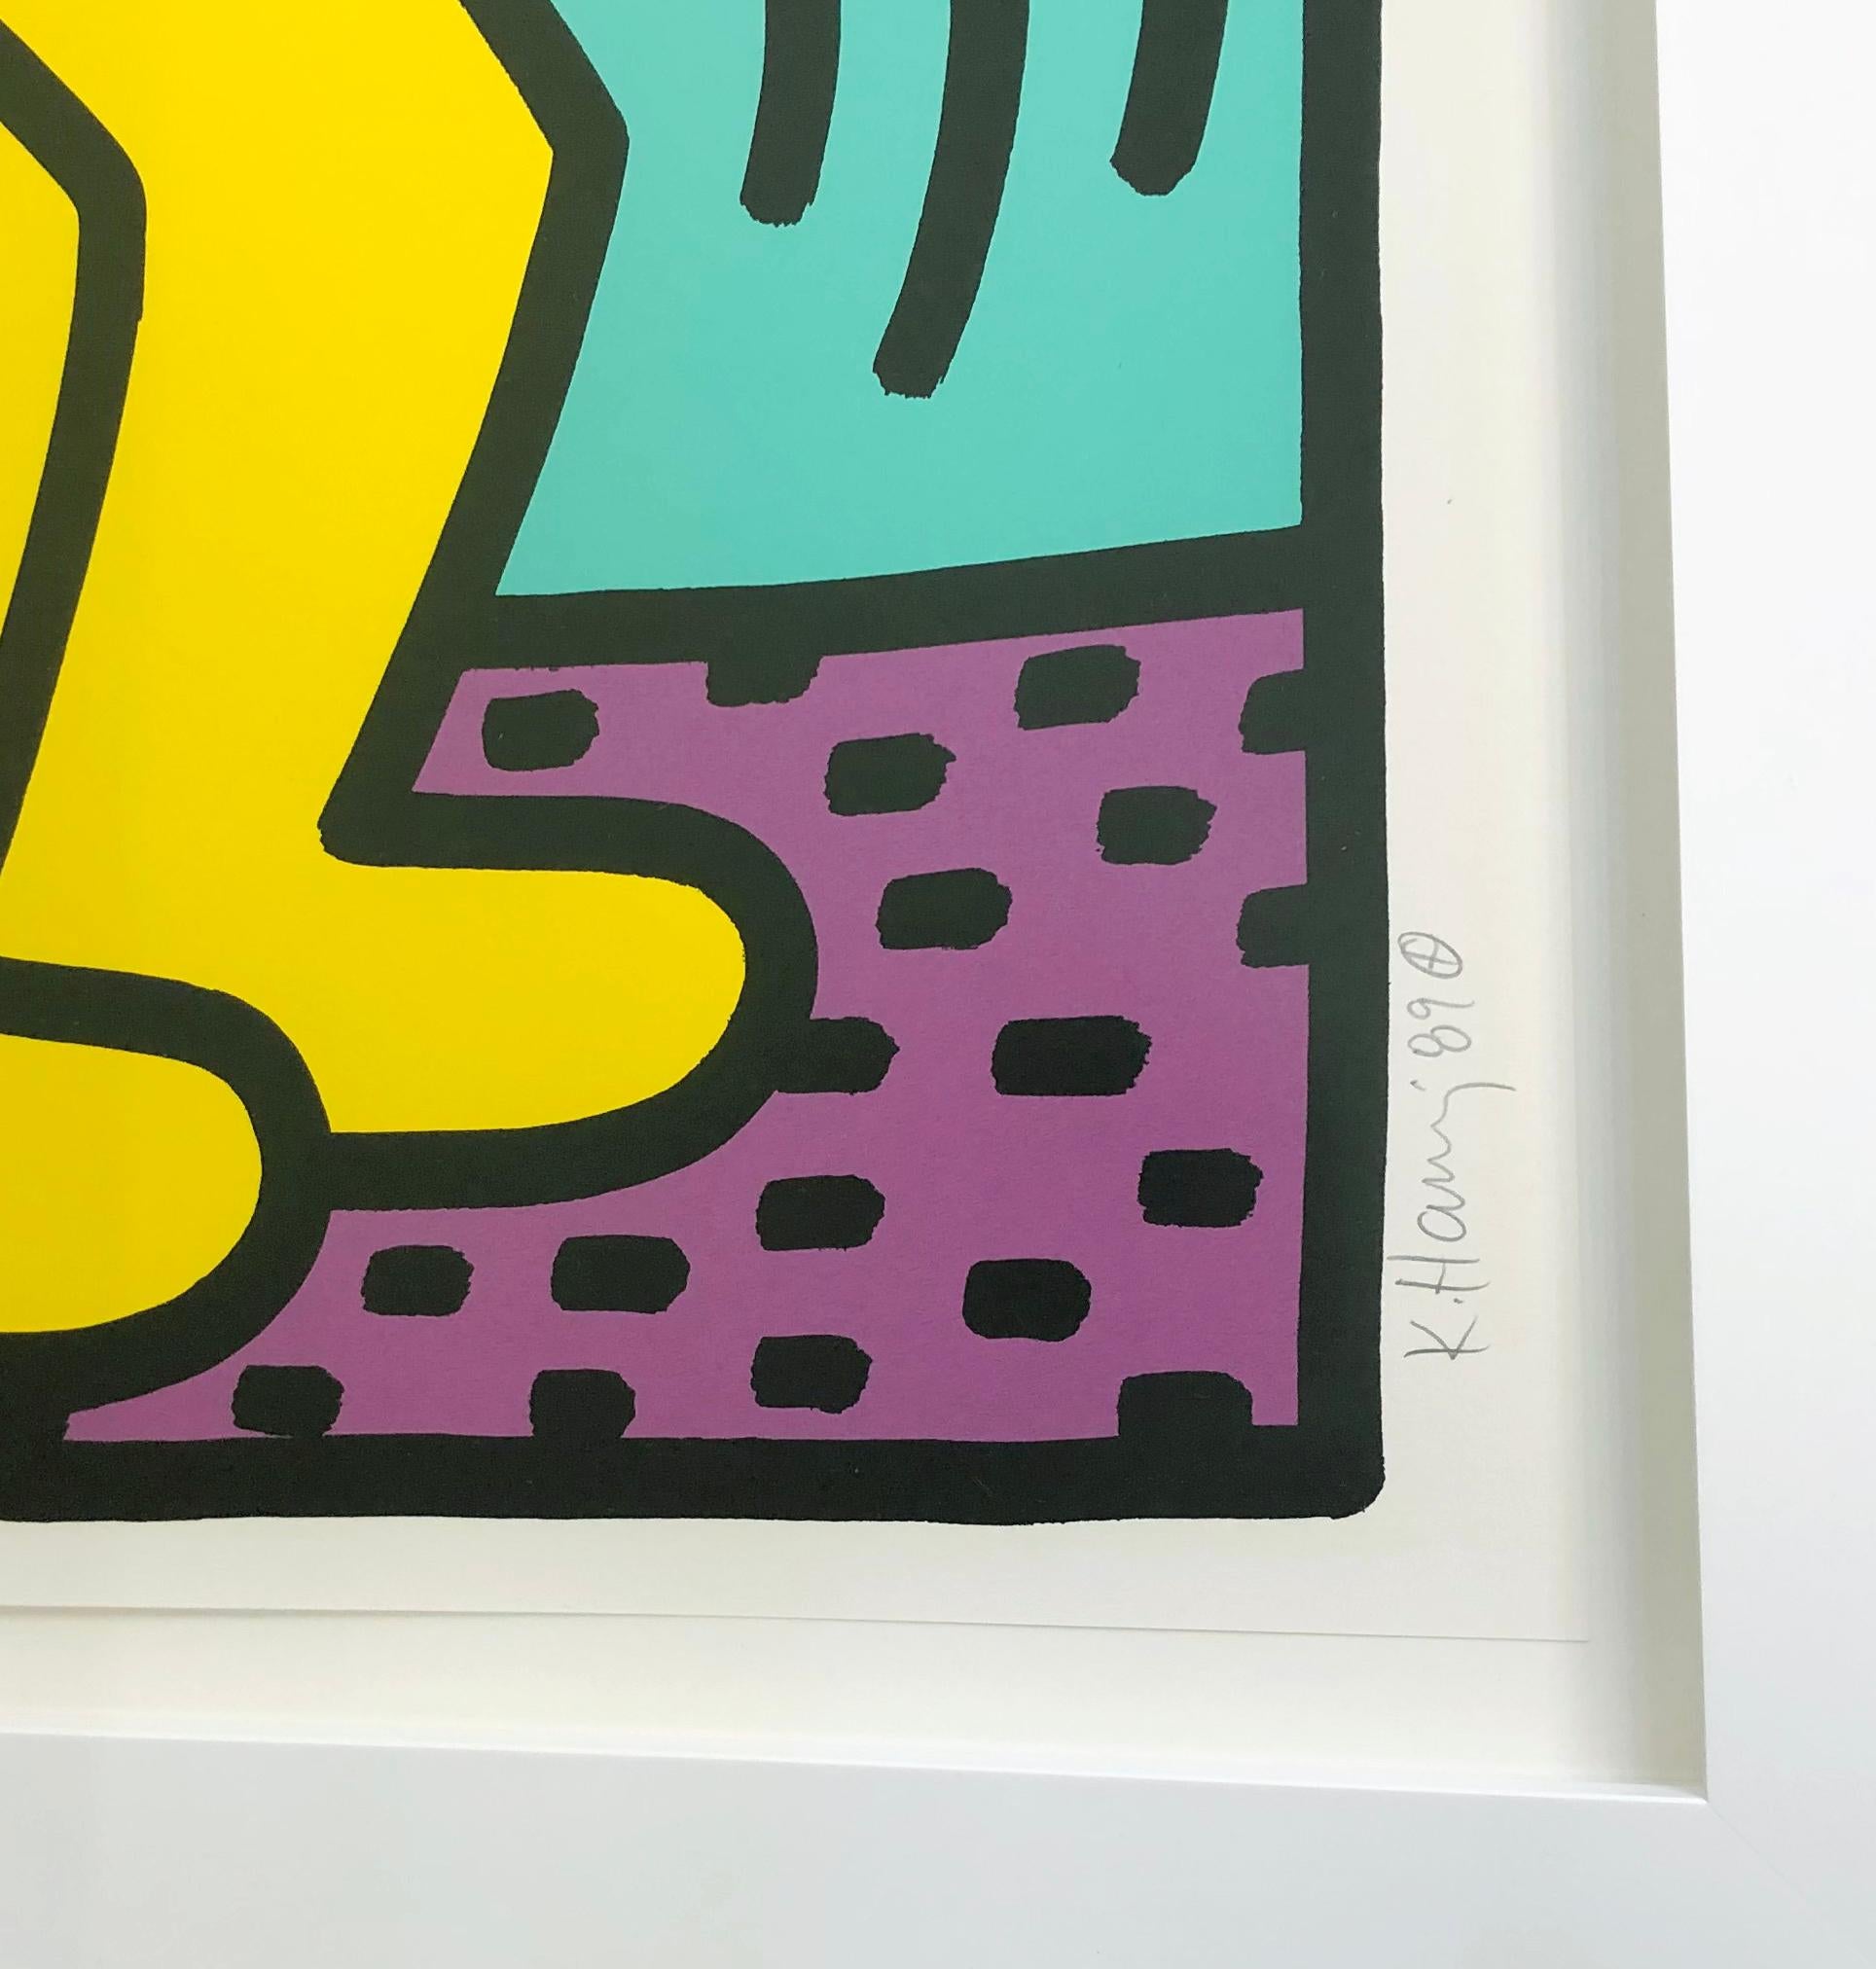 UNTITLED (CUP MAN) - Print by Keith Haring